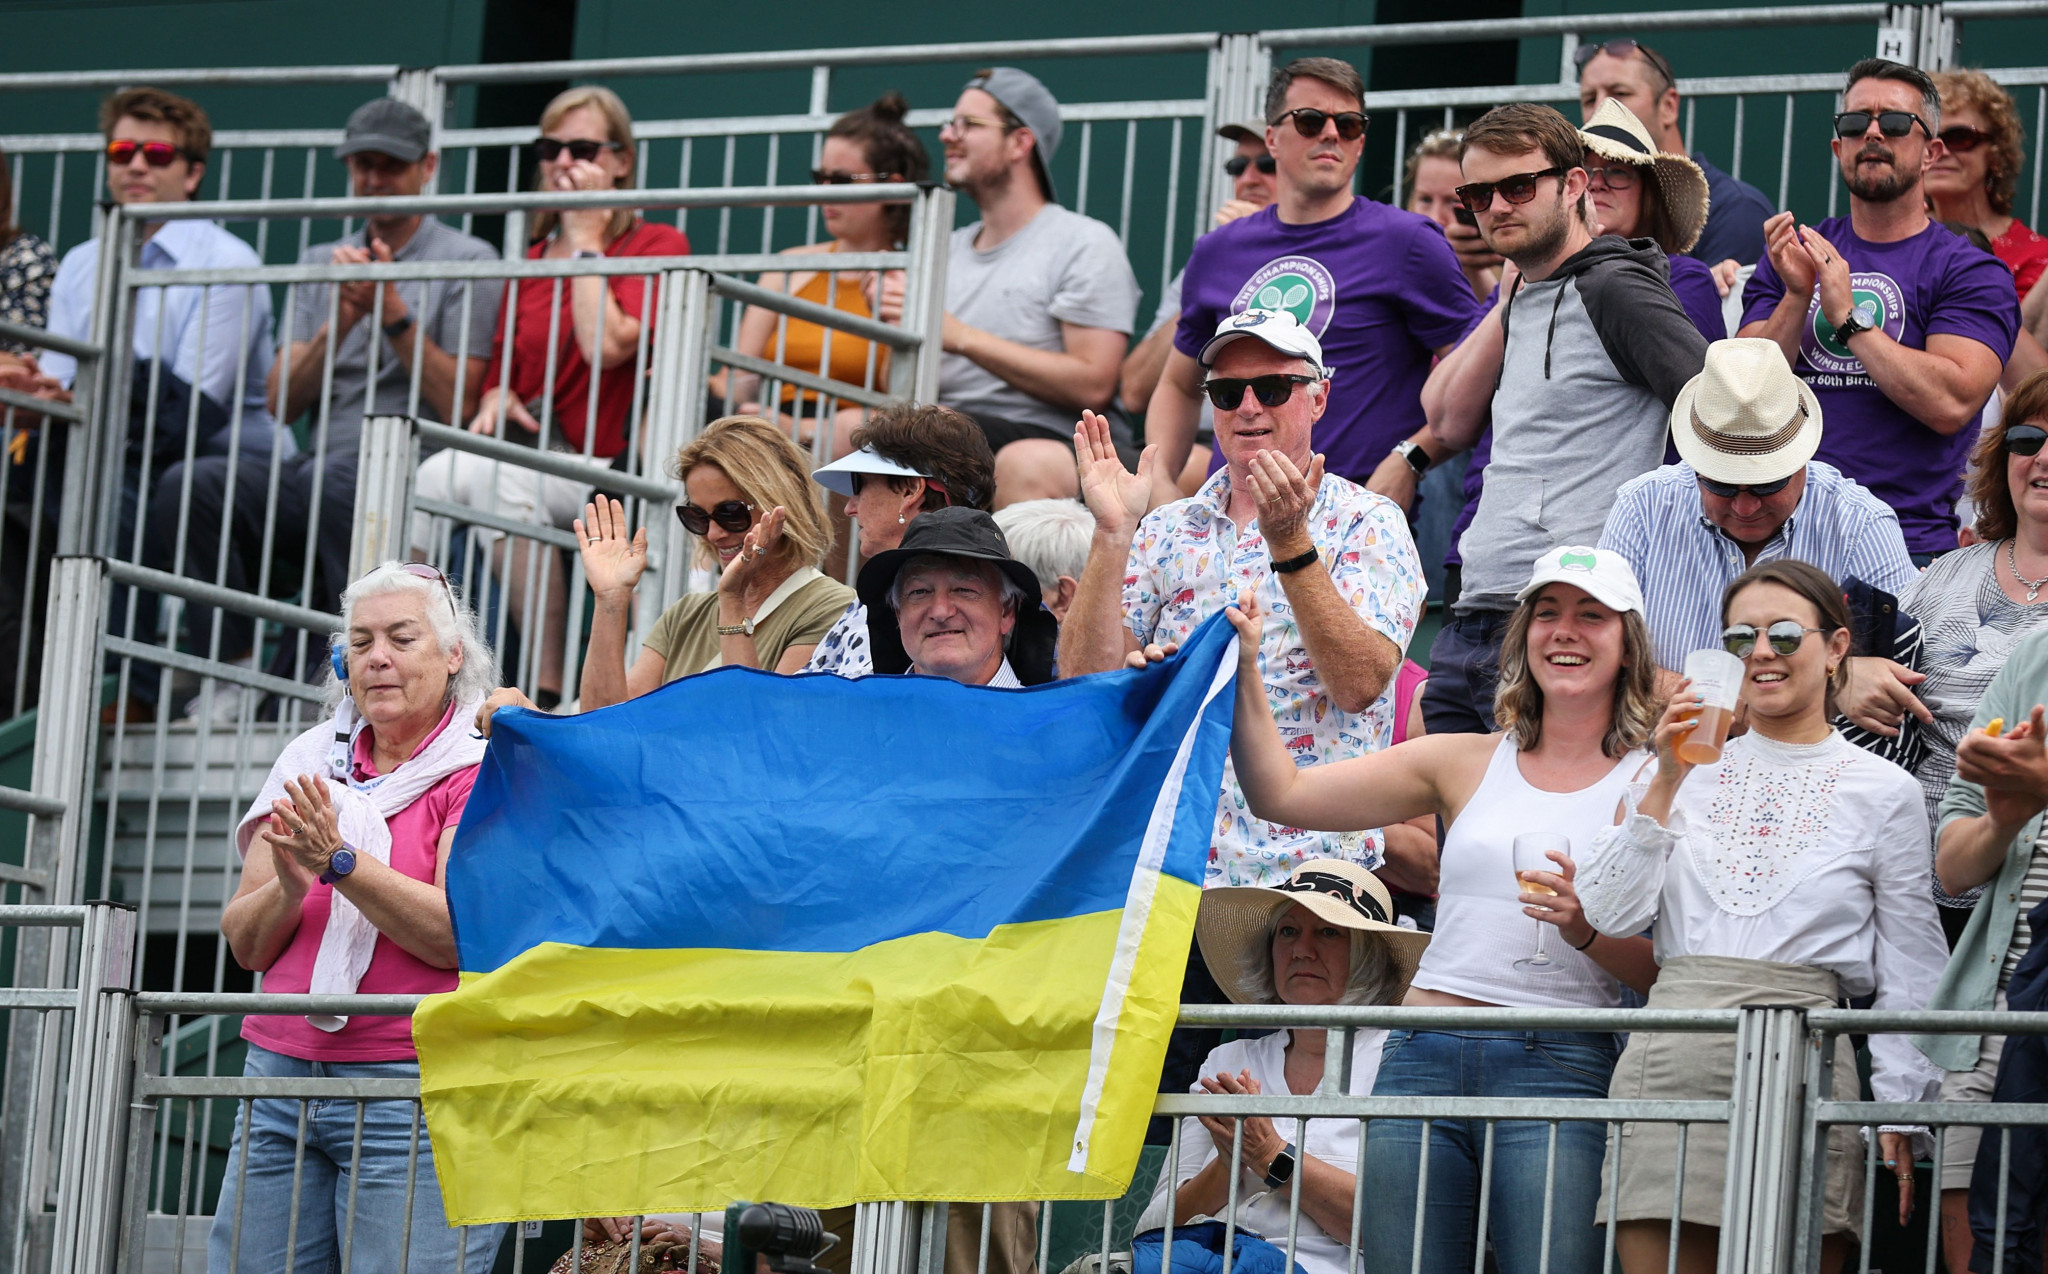 Wimbledon to financially support Ukrainian players and make donation to refugees after lifting Russian ban